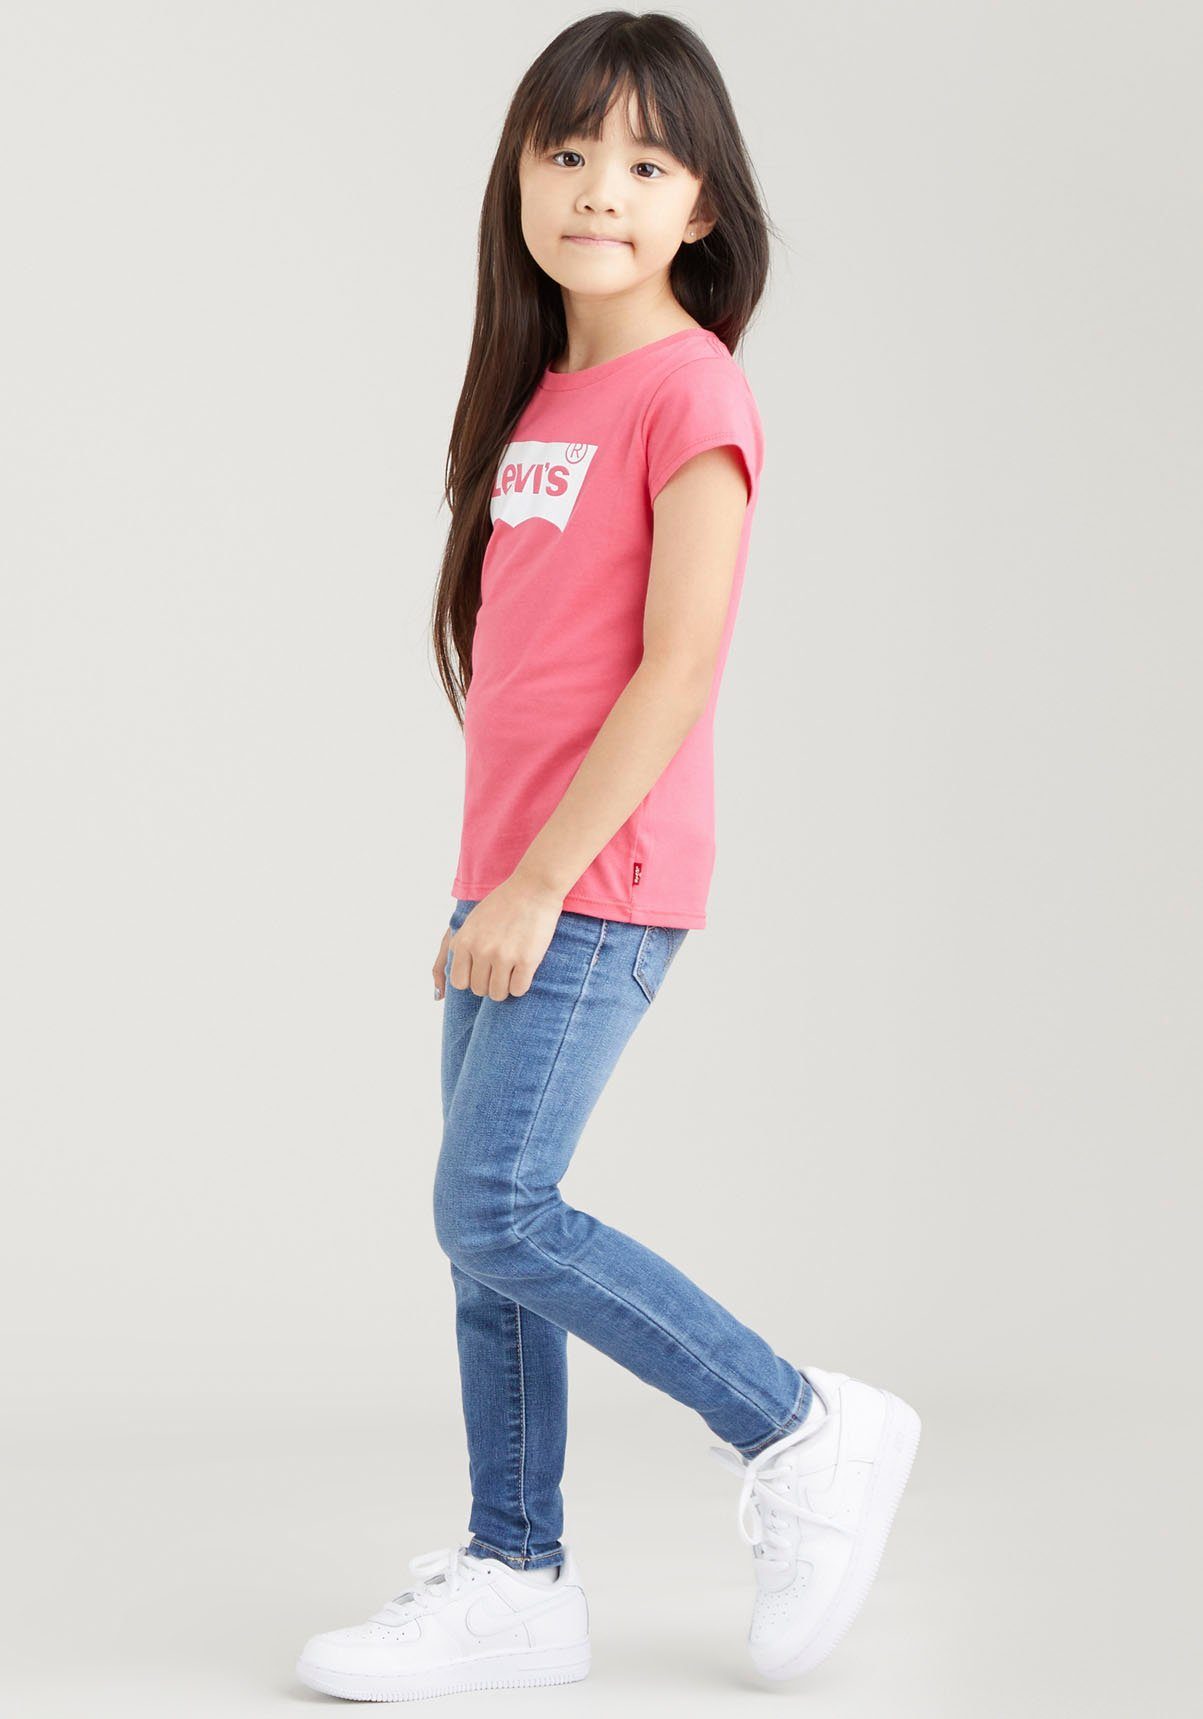 blue HIGH 720™ RISE Kids mid GIRLS for Stretch-Jeans SUPER Levi's® used SKINNY